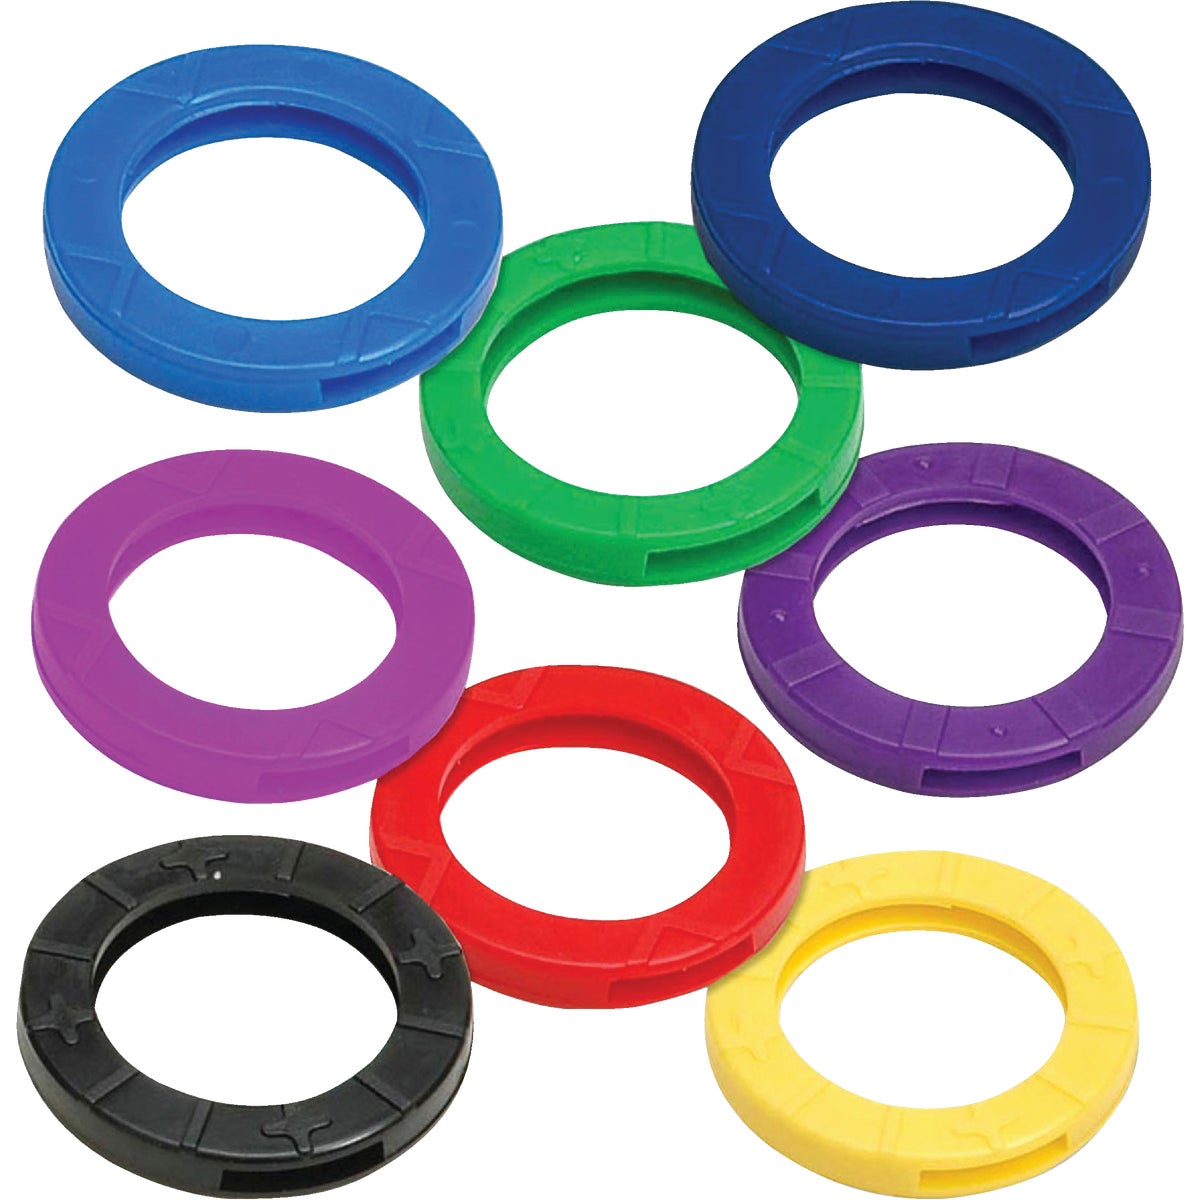 Item 572225, Identifier ring that keeps similar keys separated by color.